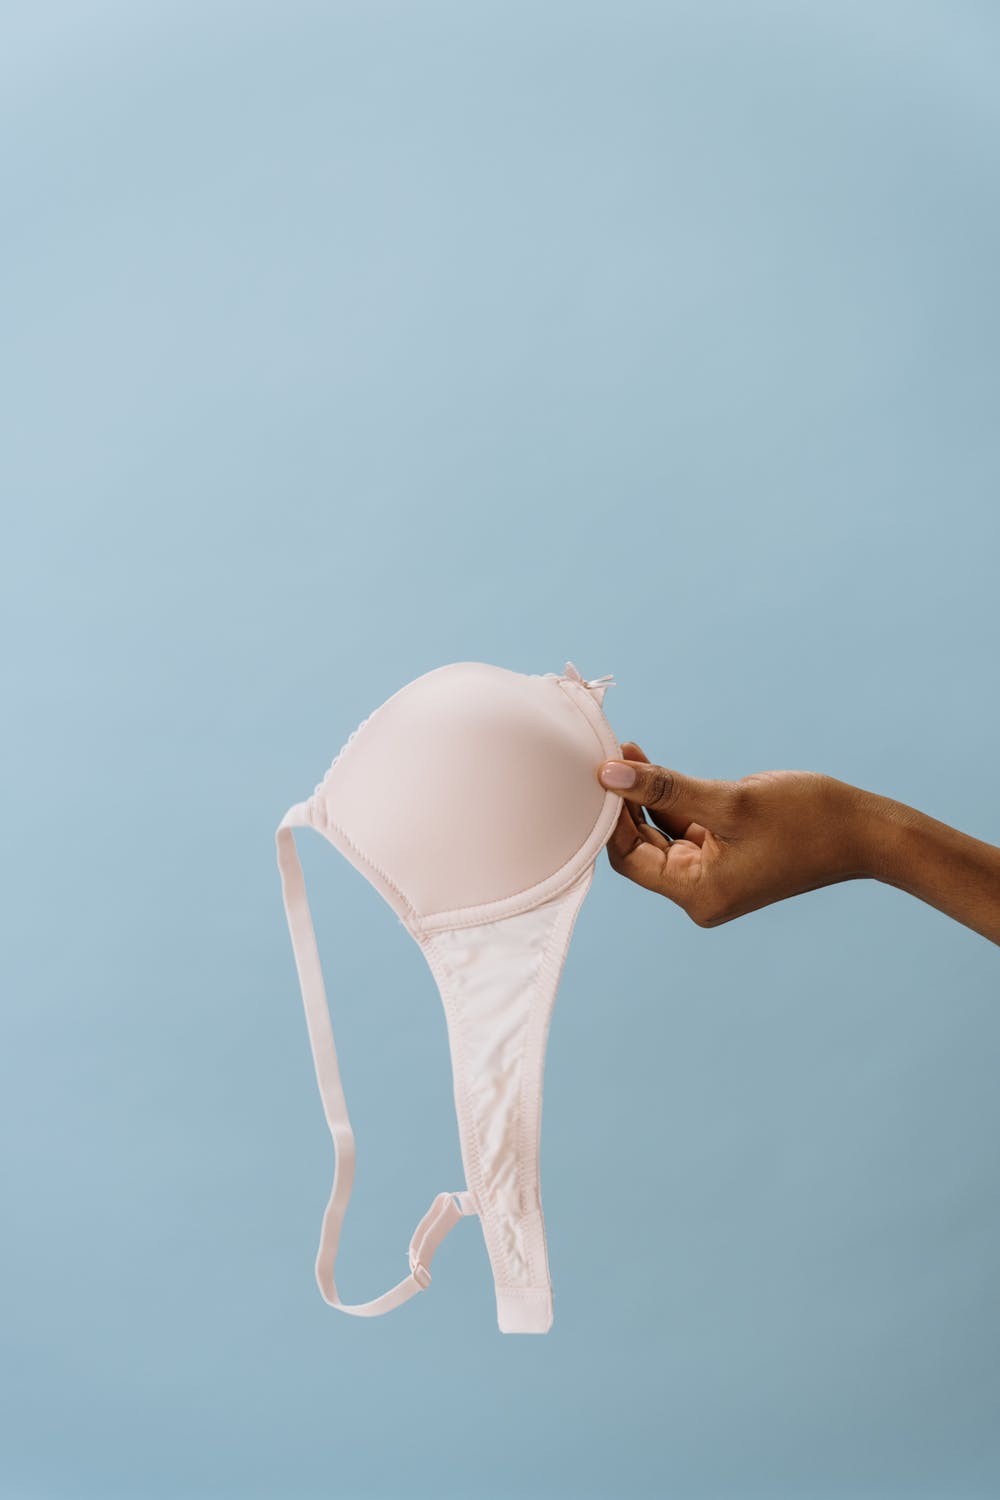 My favorite bra ever' Target fans say about dupe for best-selling